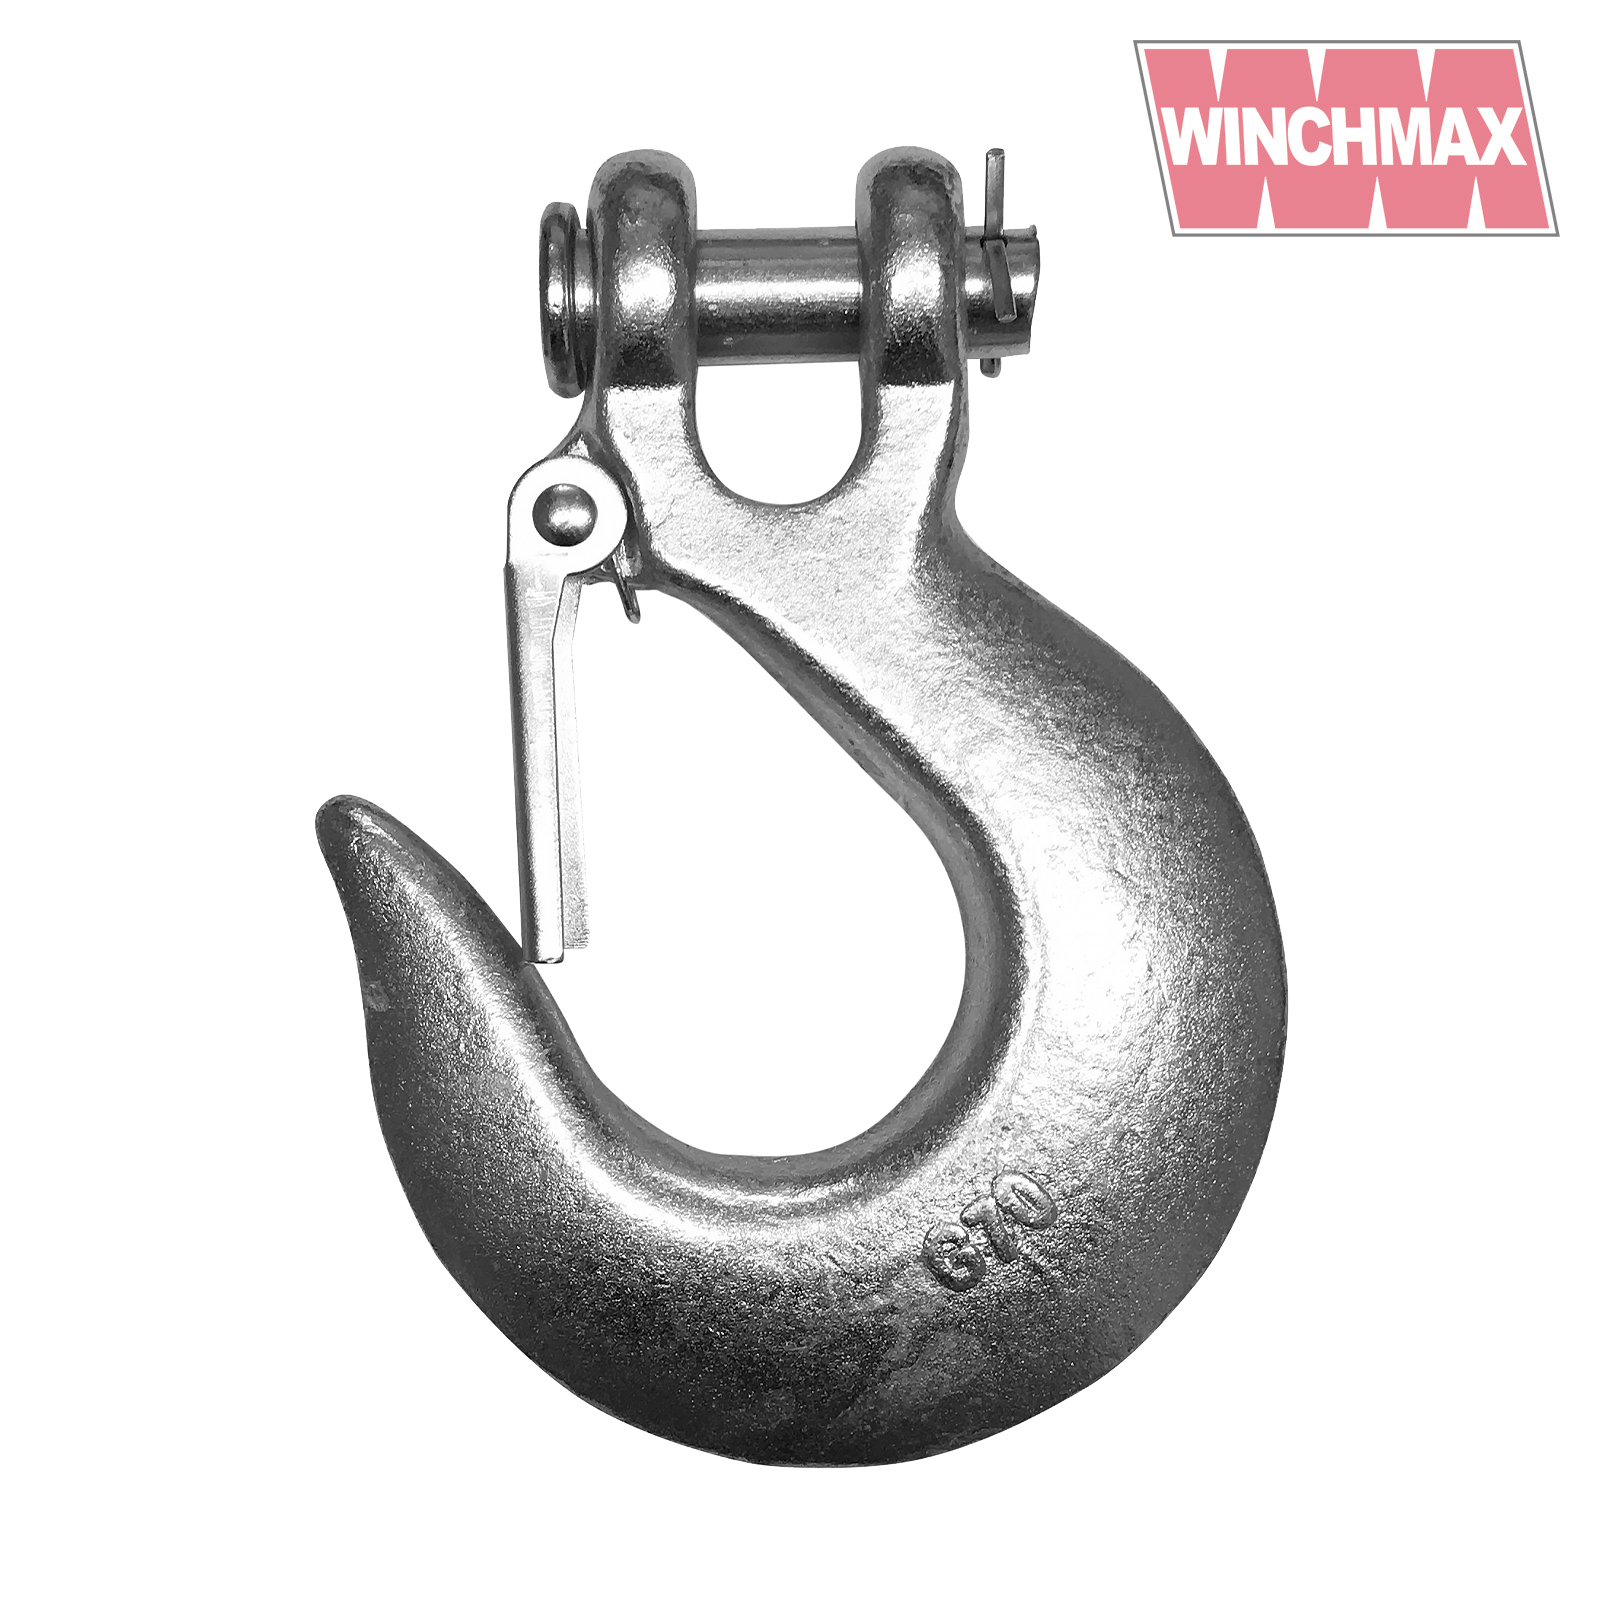 Winchmax 1/2 Inch Clevis Hook